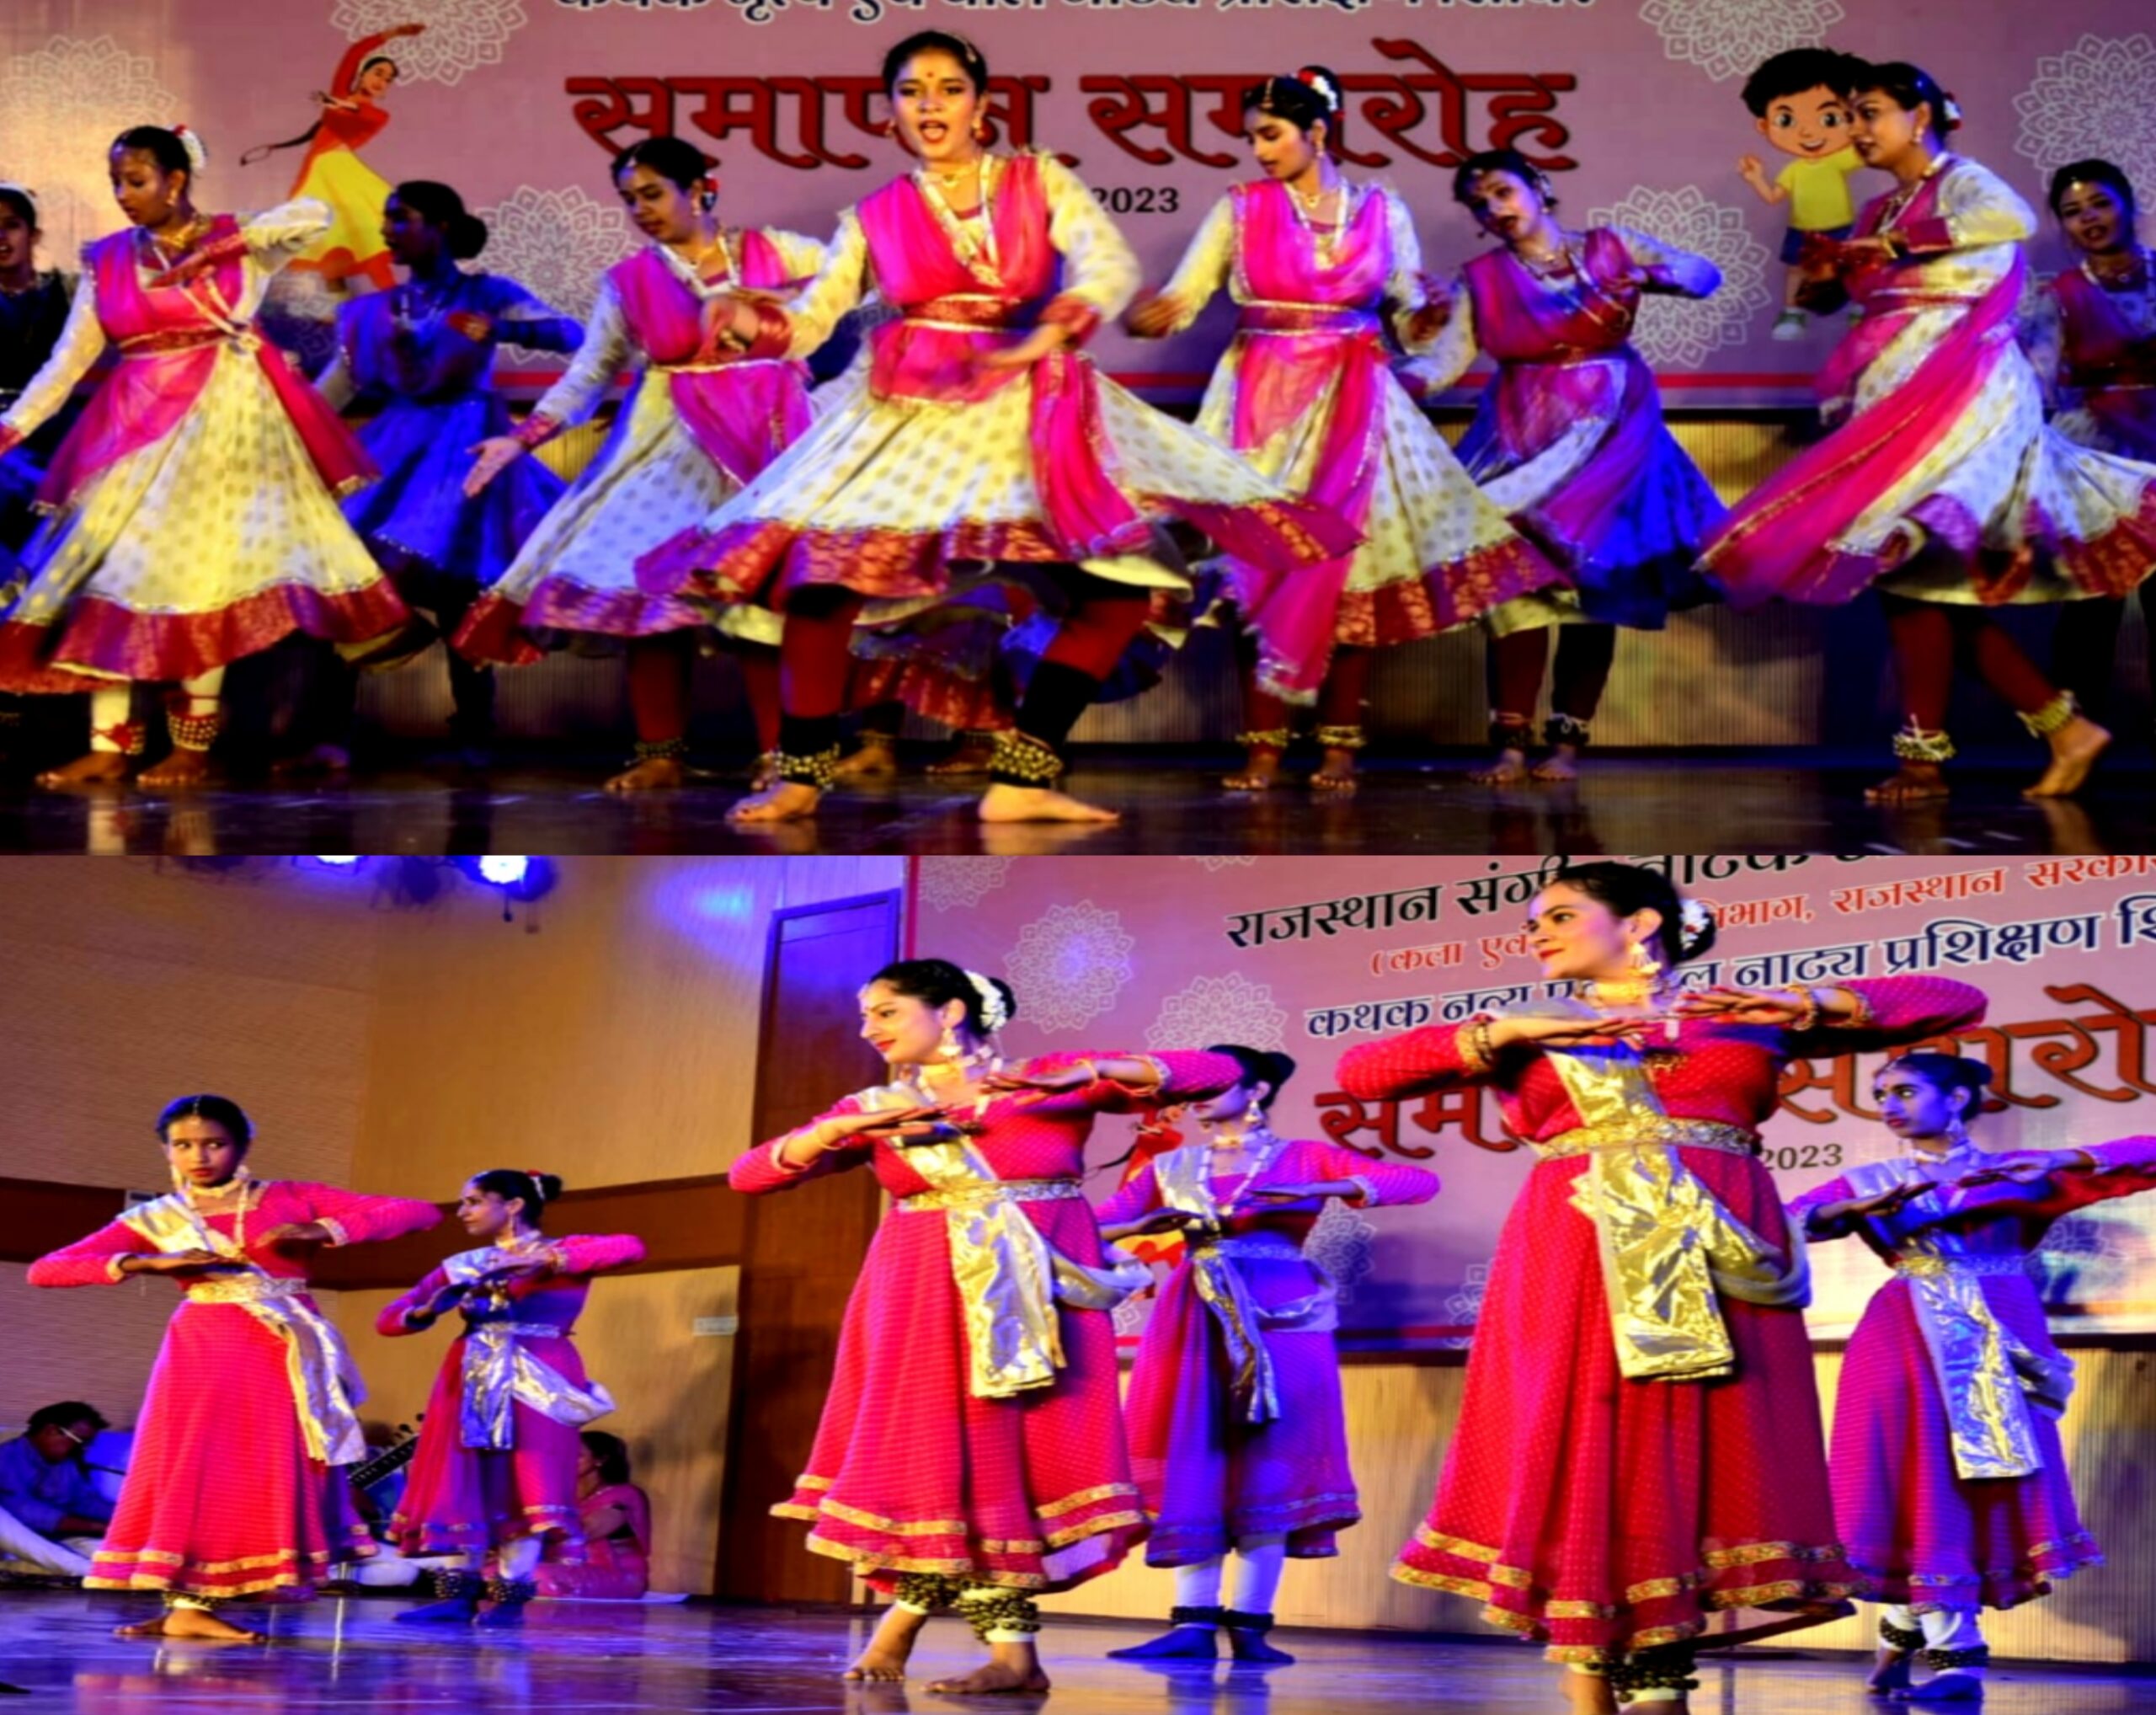 kathak-and-childrens-drama-training-camp-concluded-with-ceremony